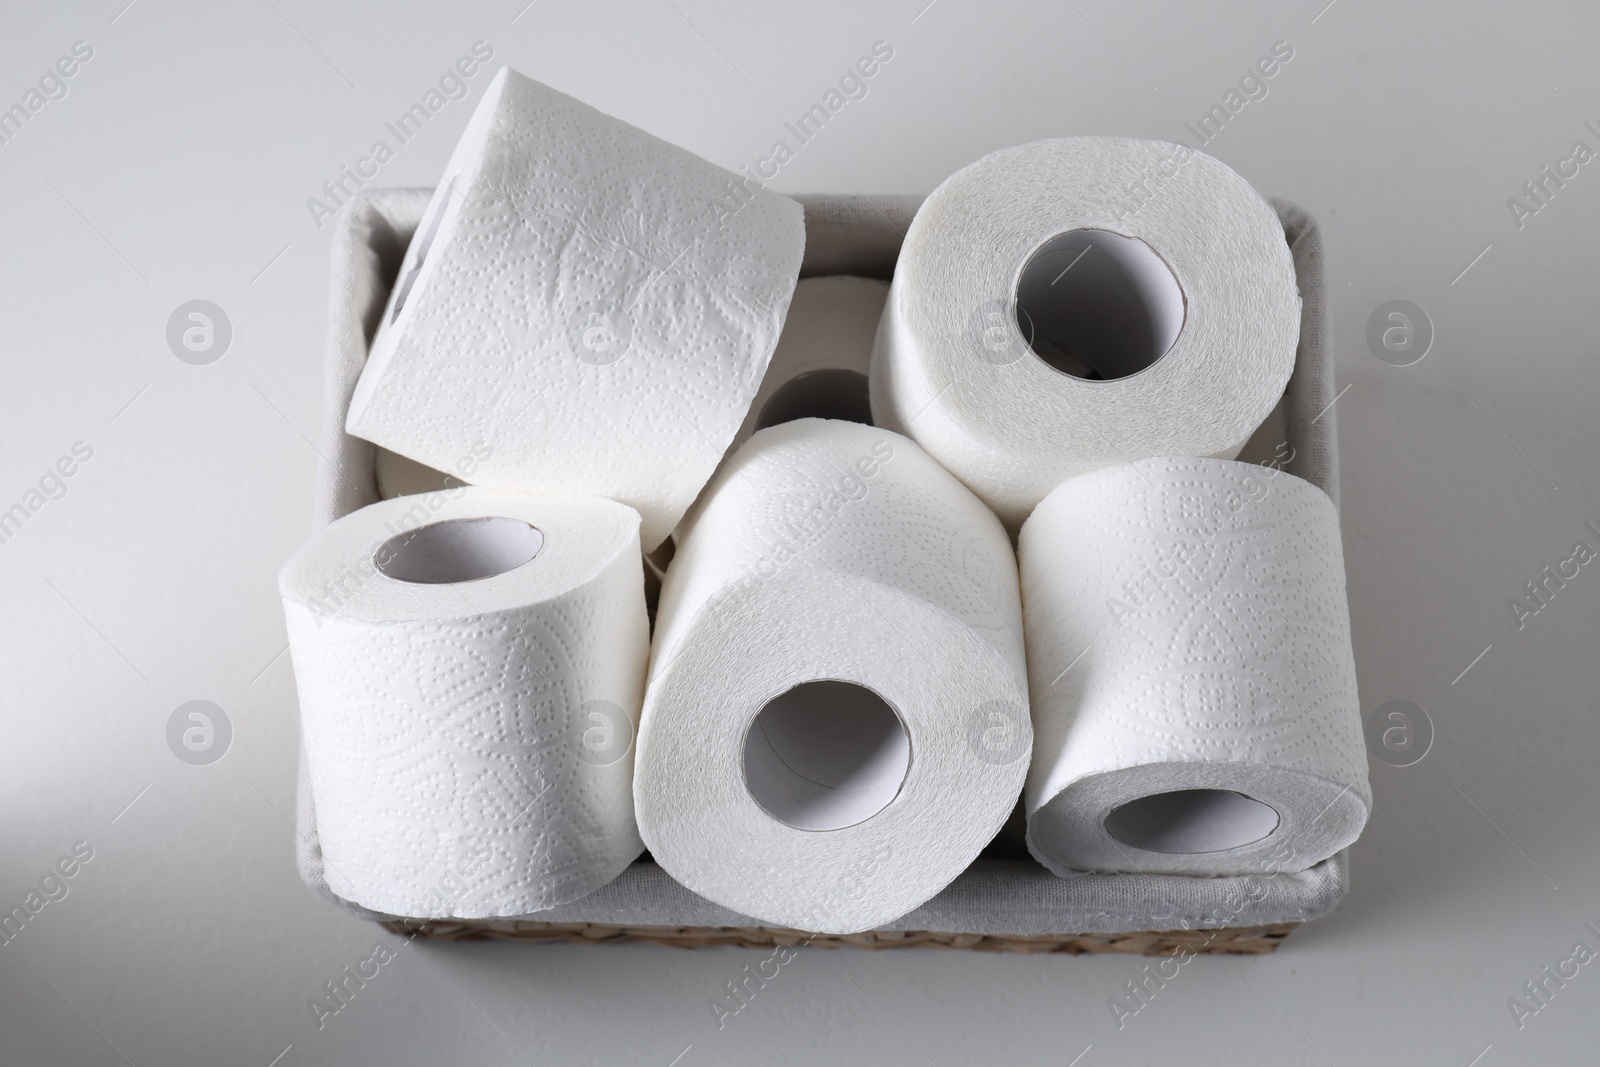 Photo of Toilet paper rolls in basket on white table, top view